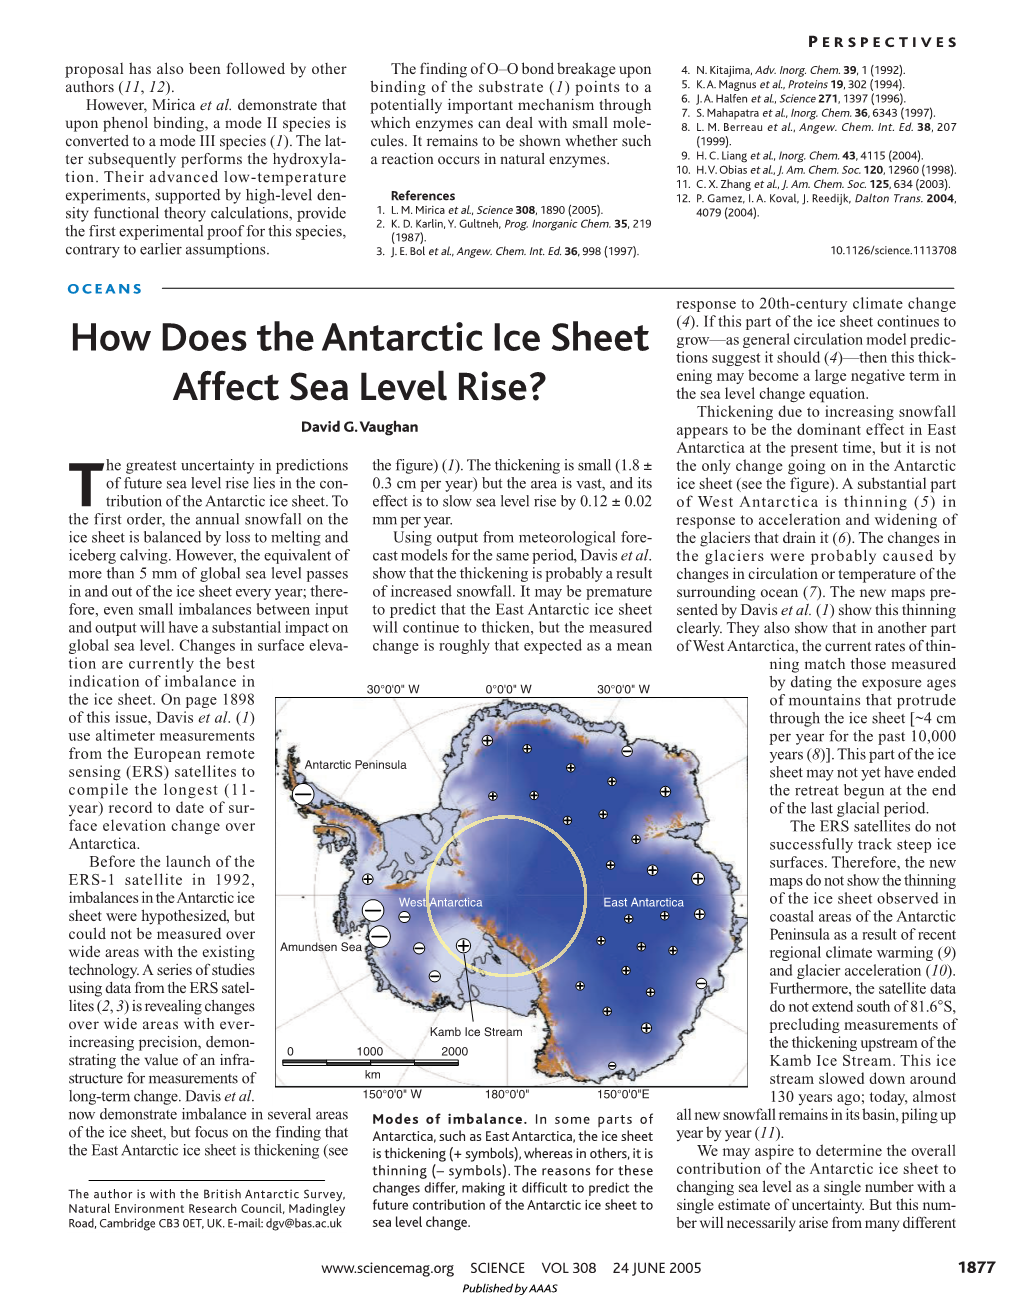 + How Does the Antarctic Ice Sheet Affect Sea Level Rise? (.Pdf